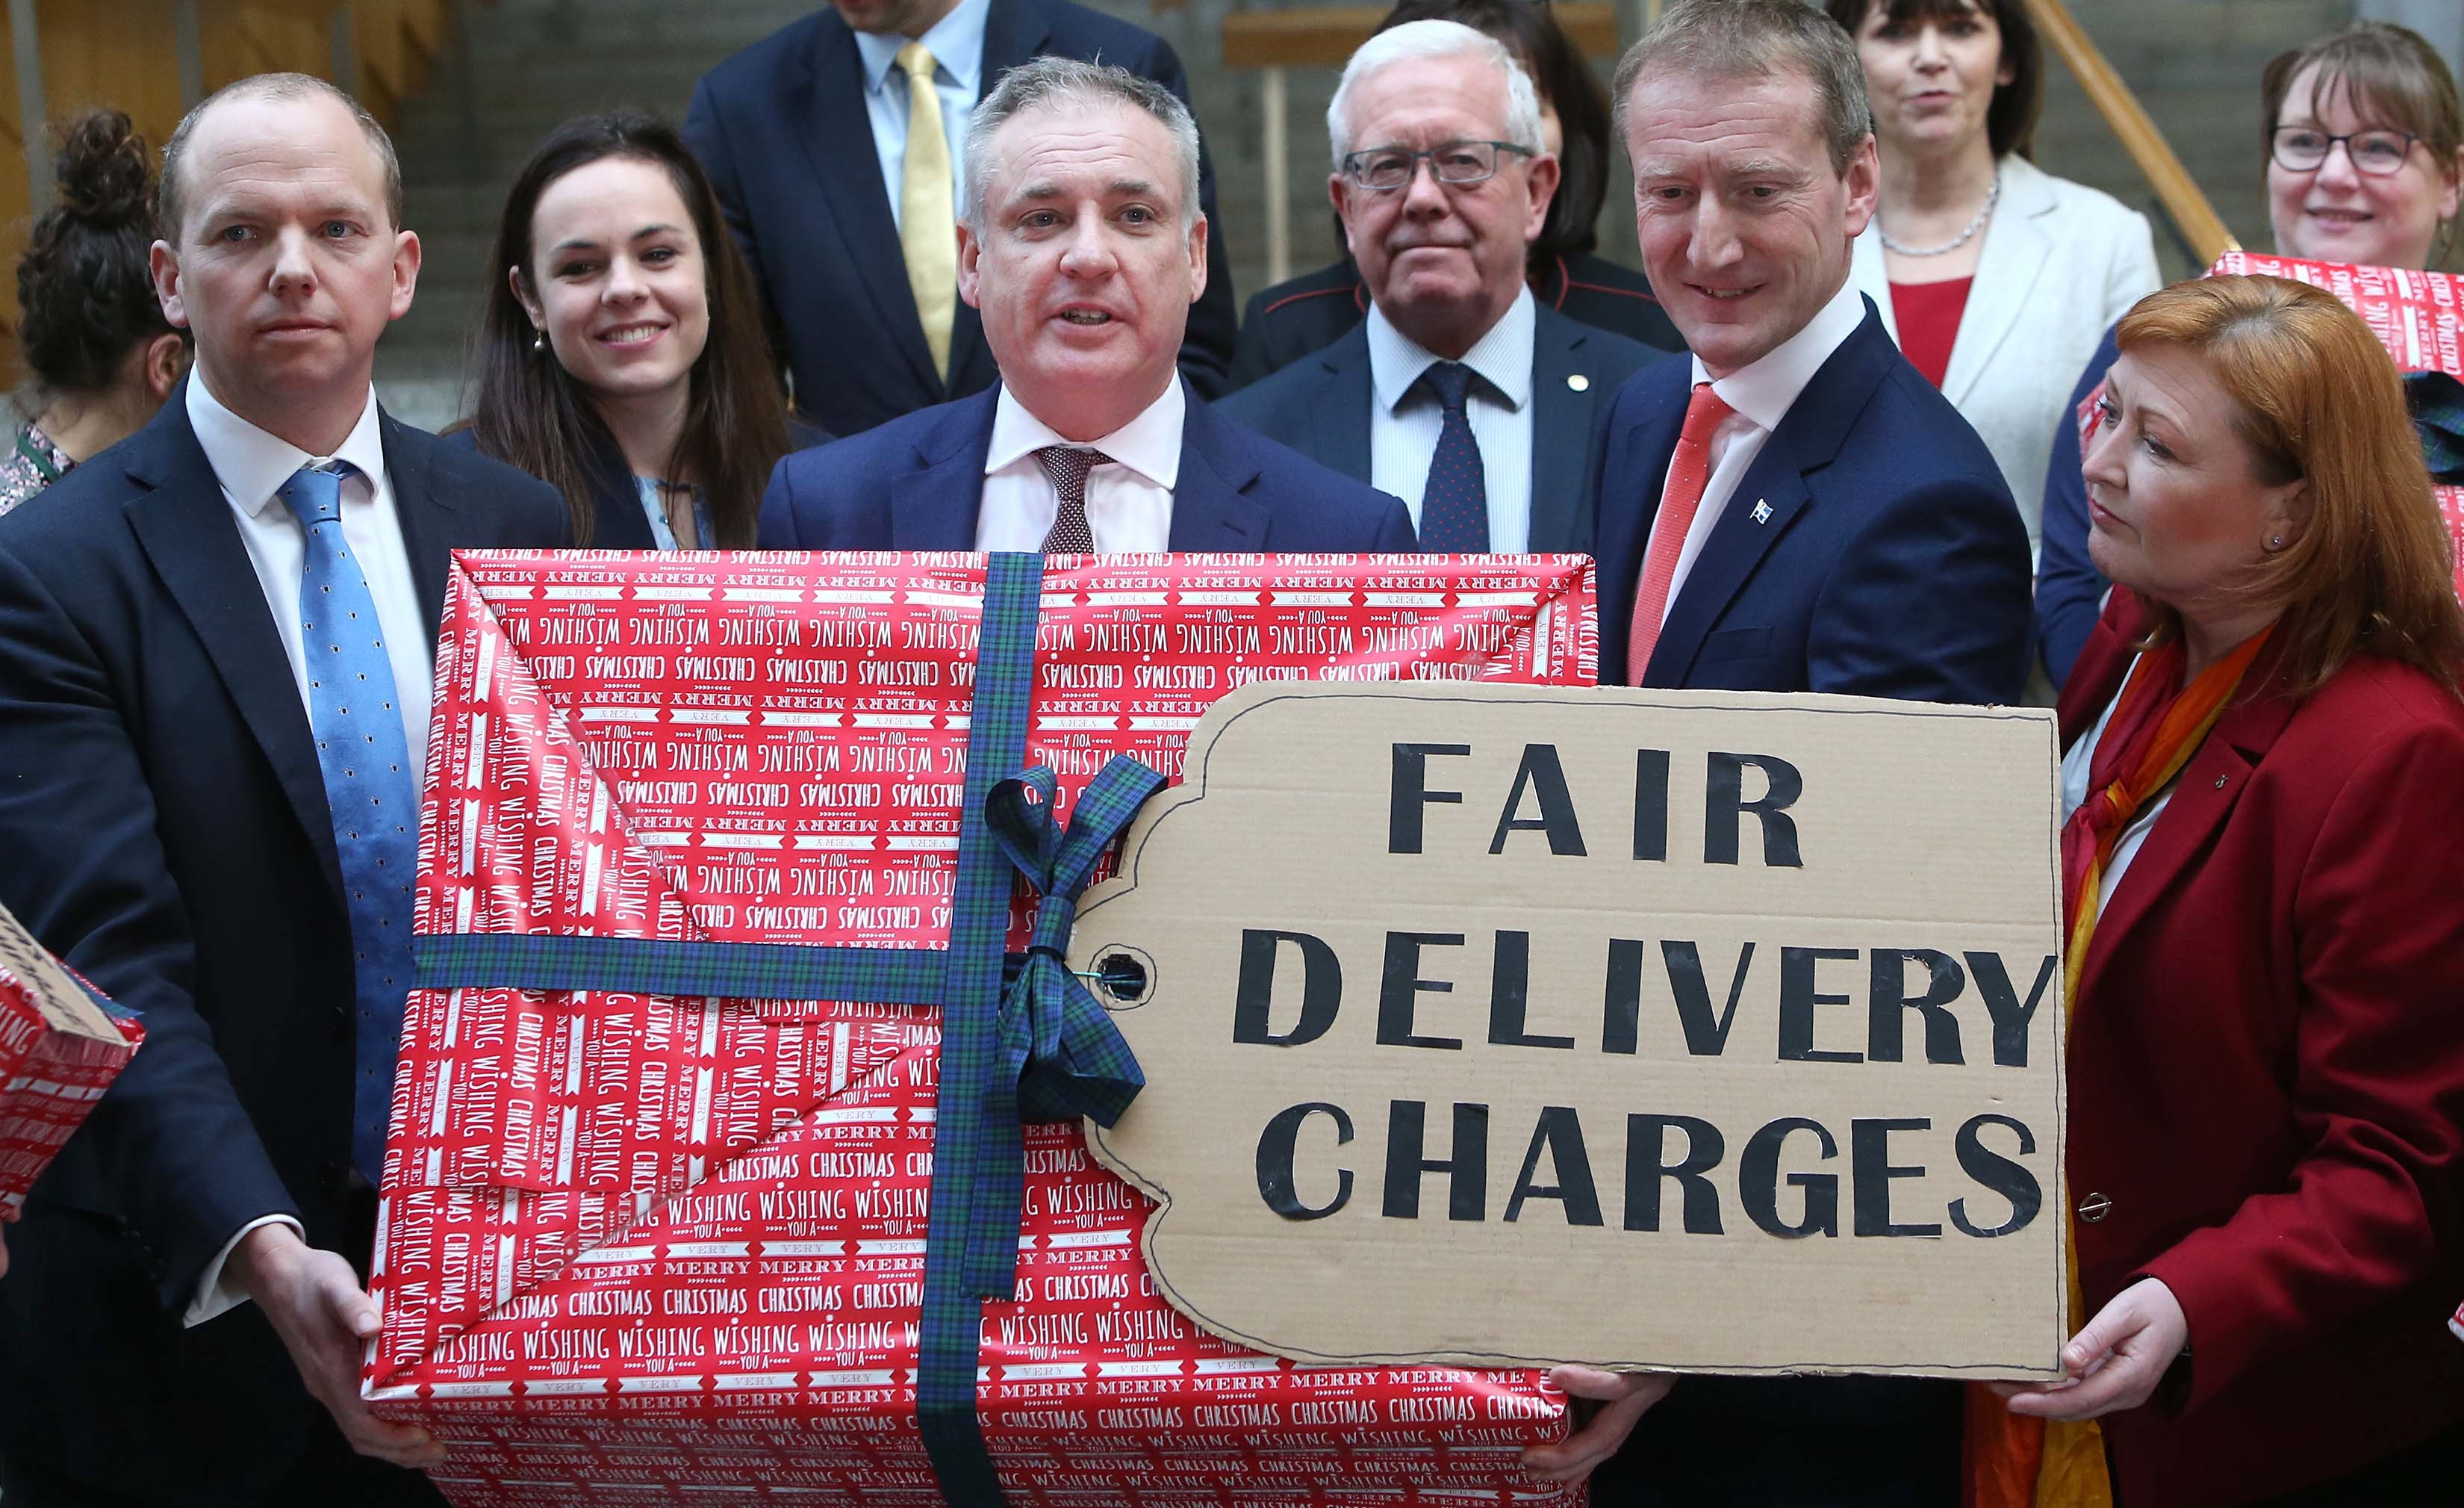 The campaign for fair delivery charges received cross-party support in the Scottish Parliament.